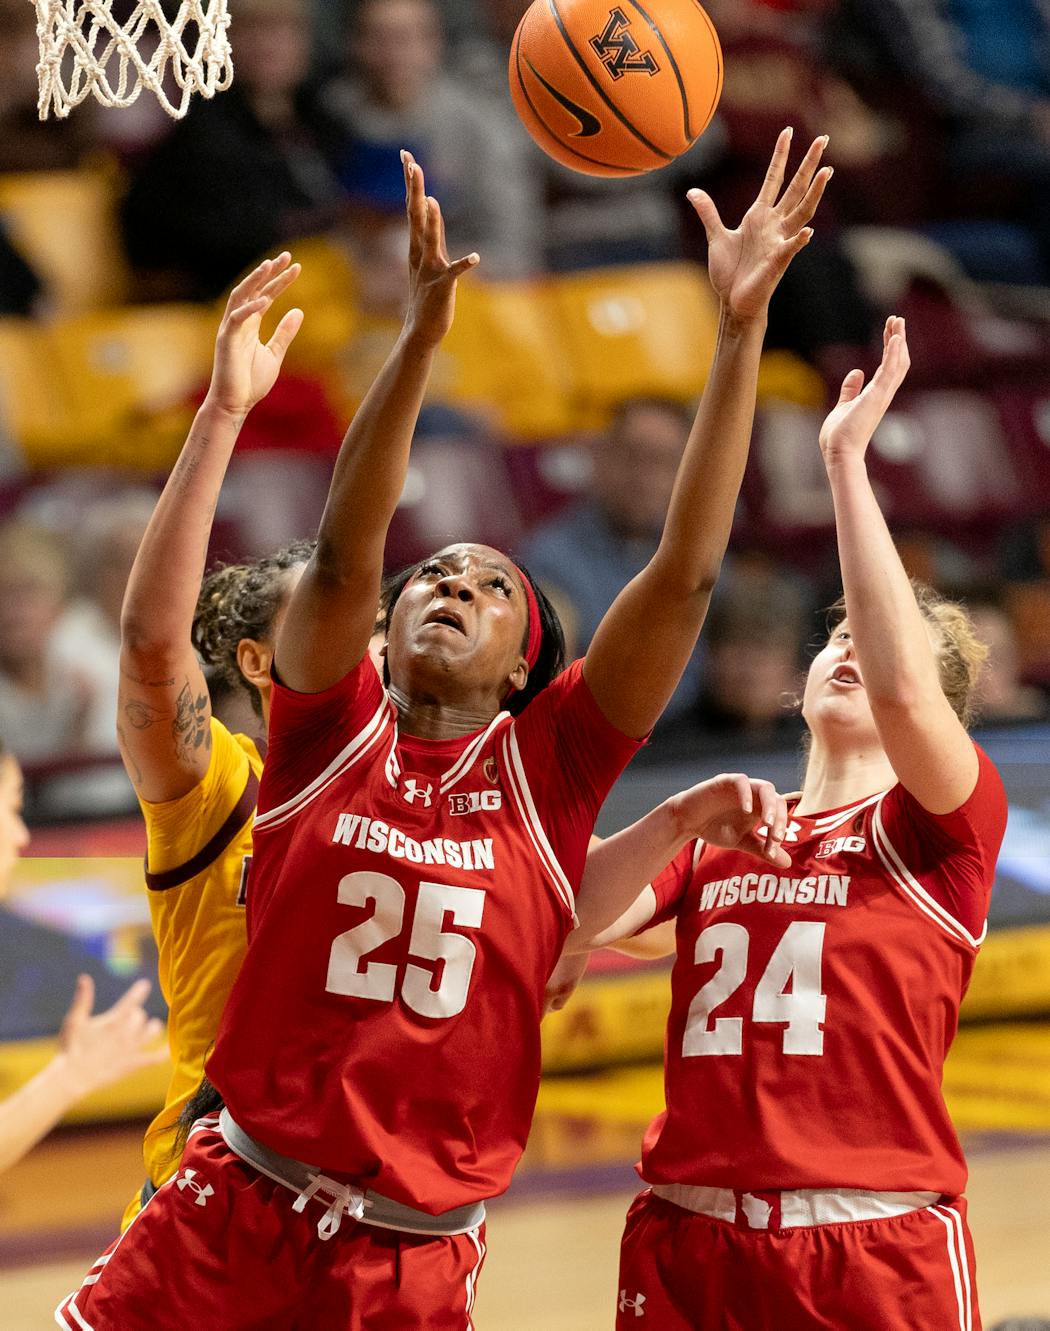 Serah Williams (25), a sophomore, is already a star for the Badgers and promises only to improve in coming seasons.